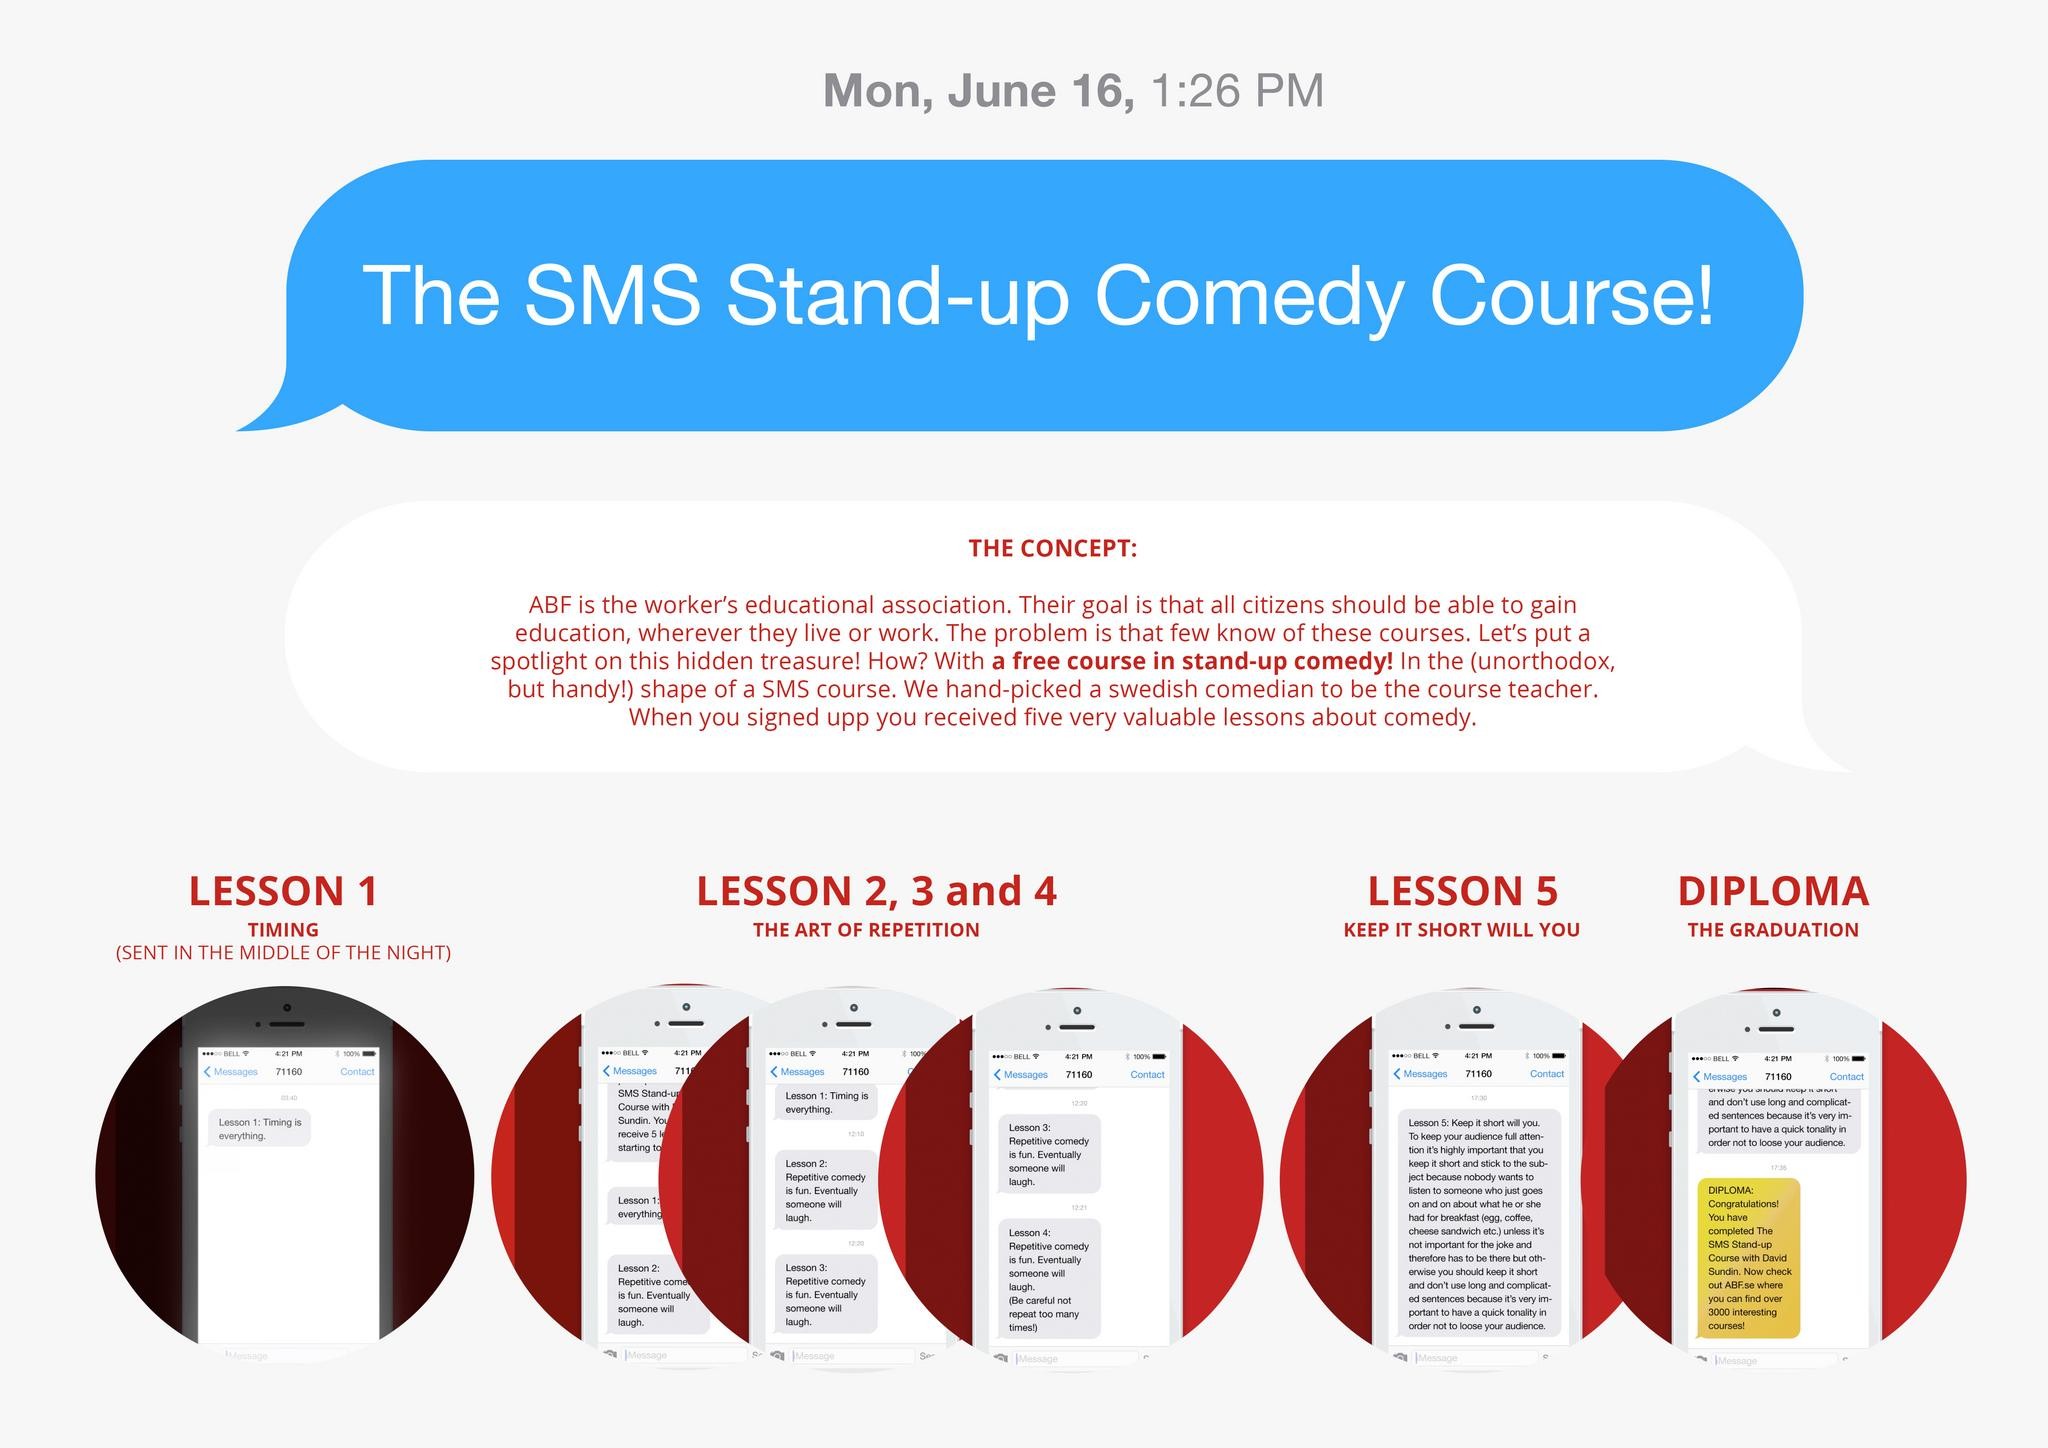 THE SMS STAND-UP COMEDY COURSE!